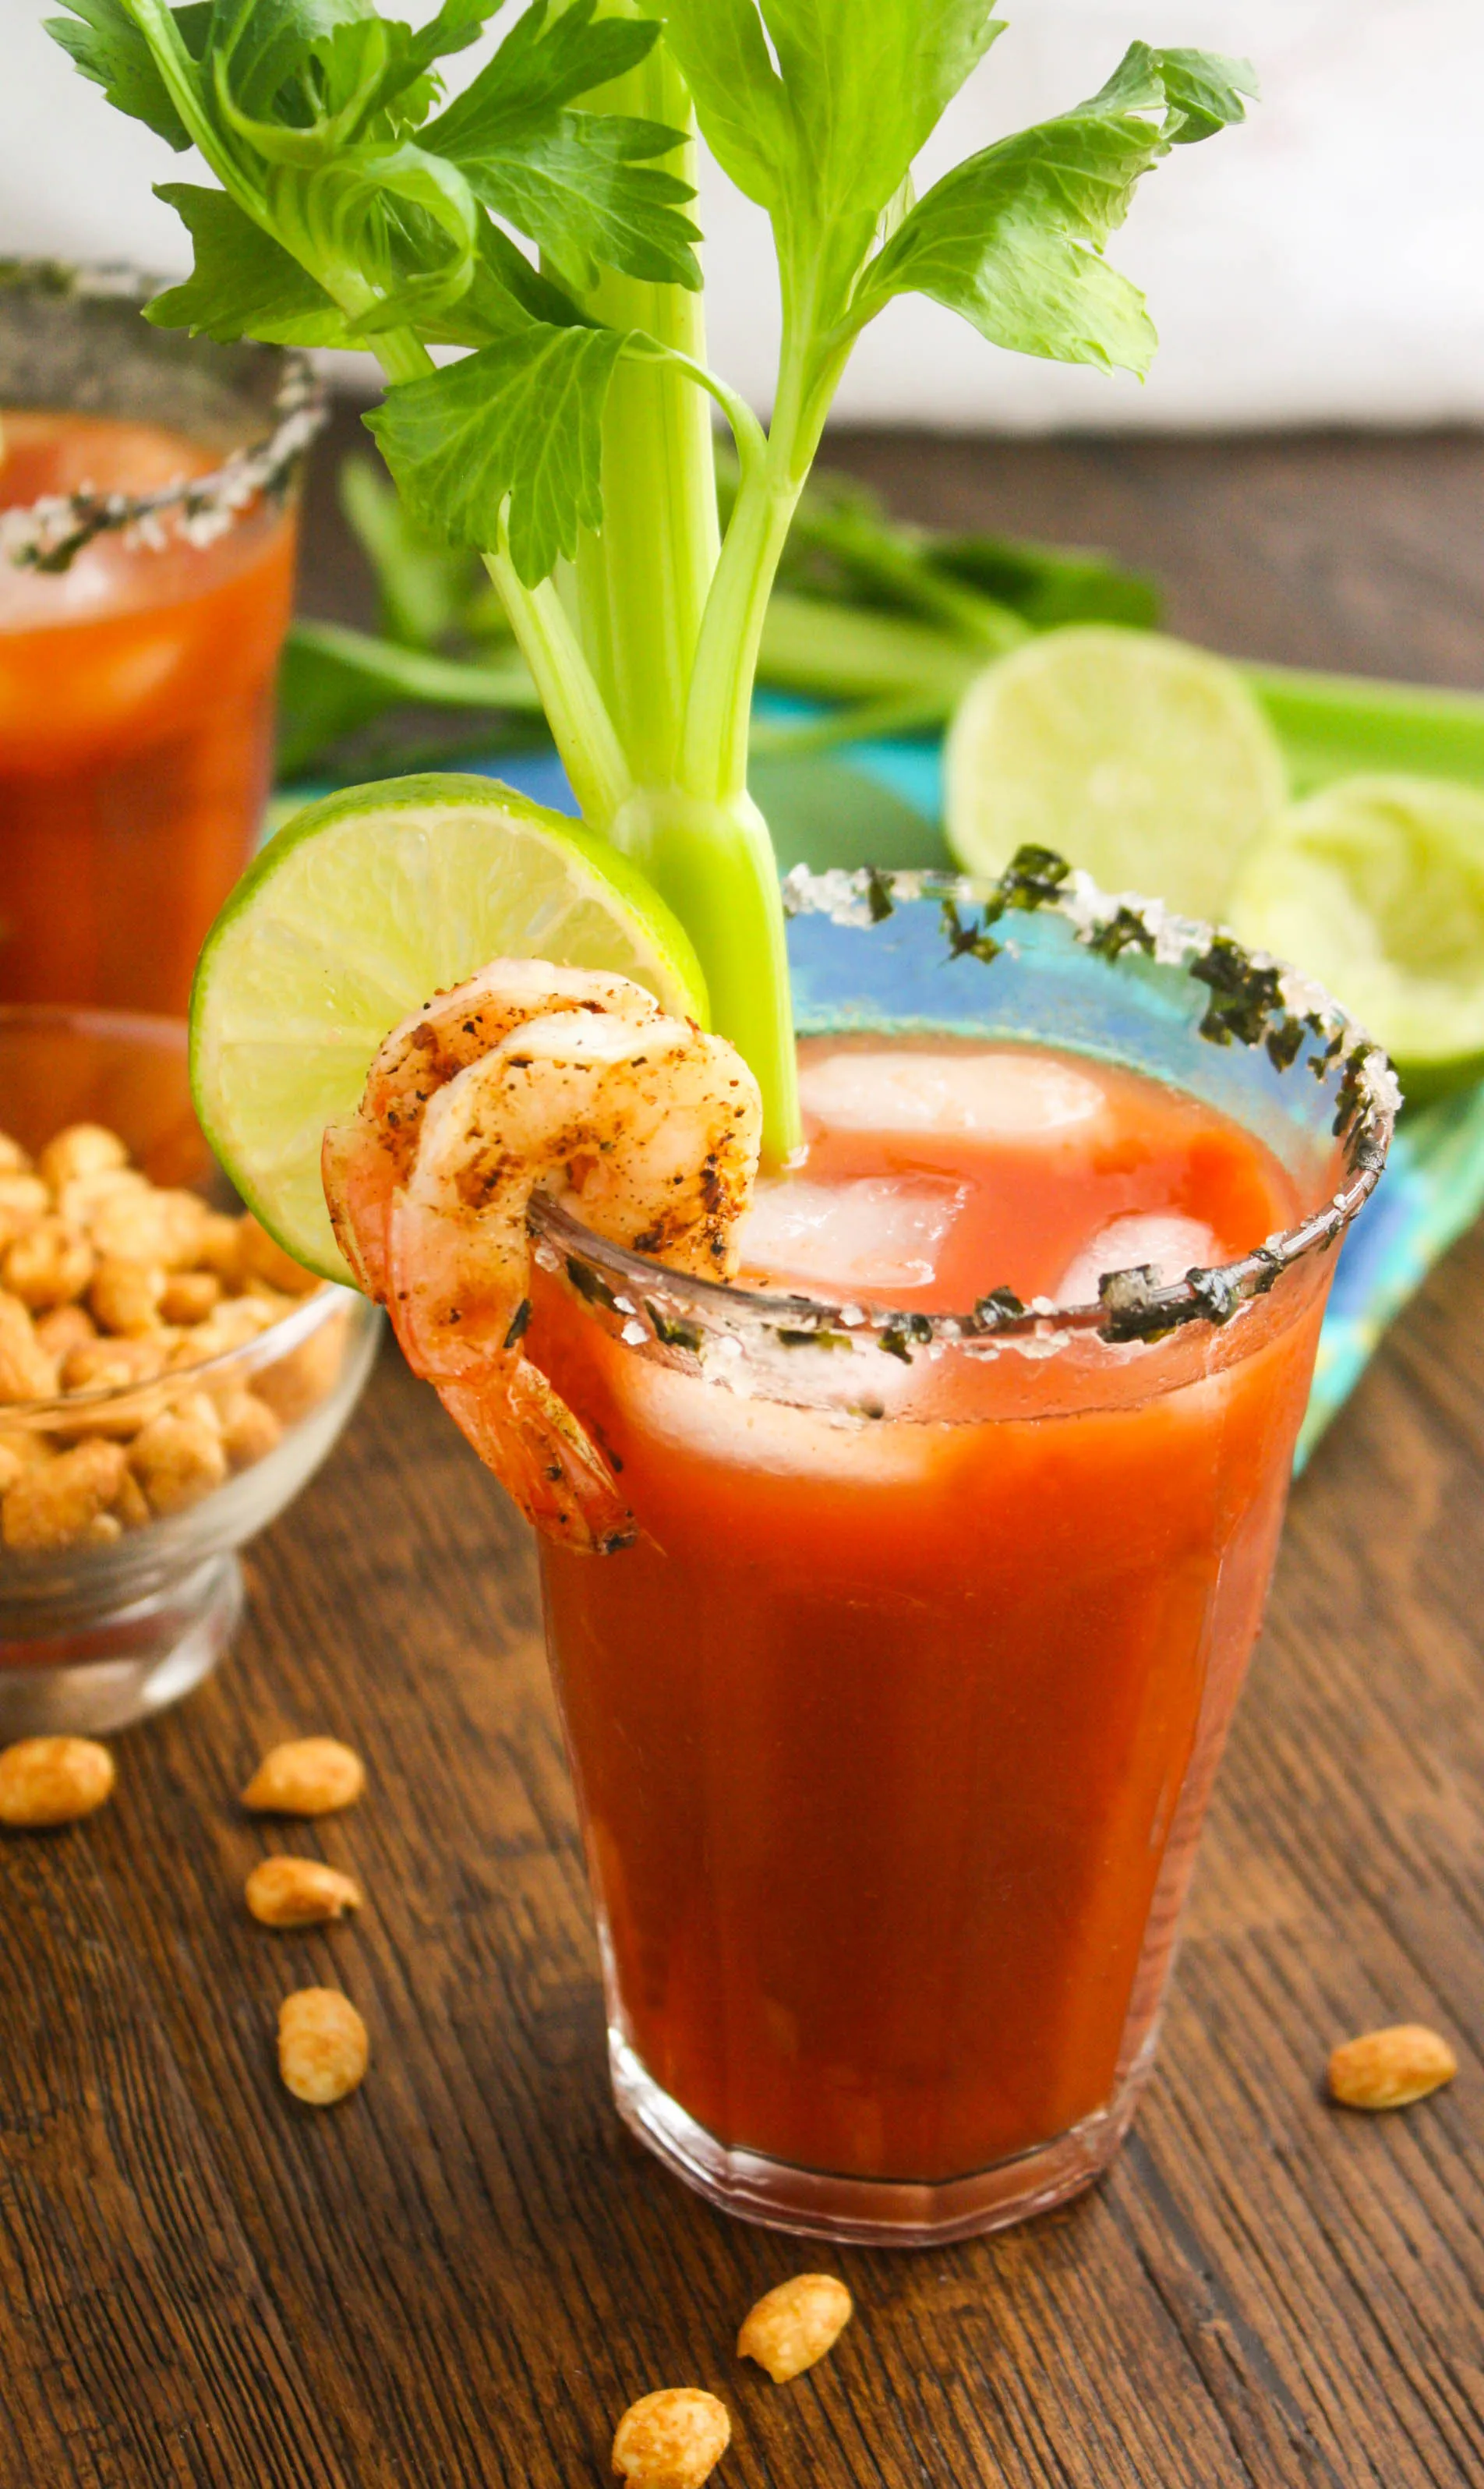 Asian Bloody Mary Cocktails are a fun way to kick off the weekend! You'll love the flavors combined in this cocktail!